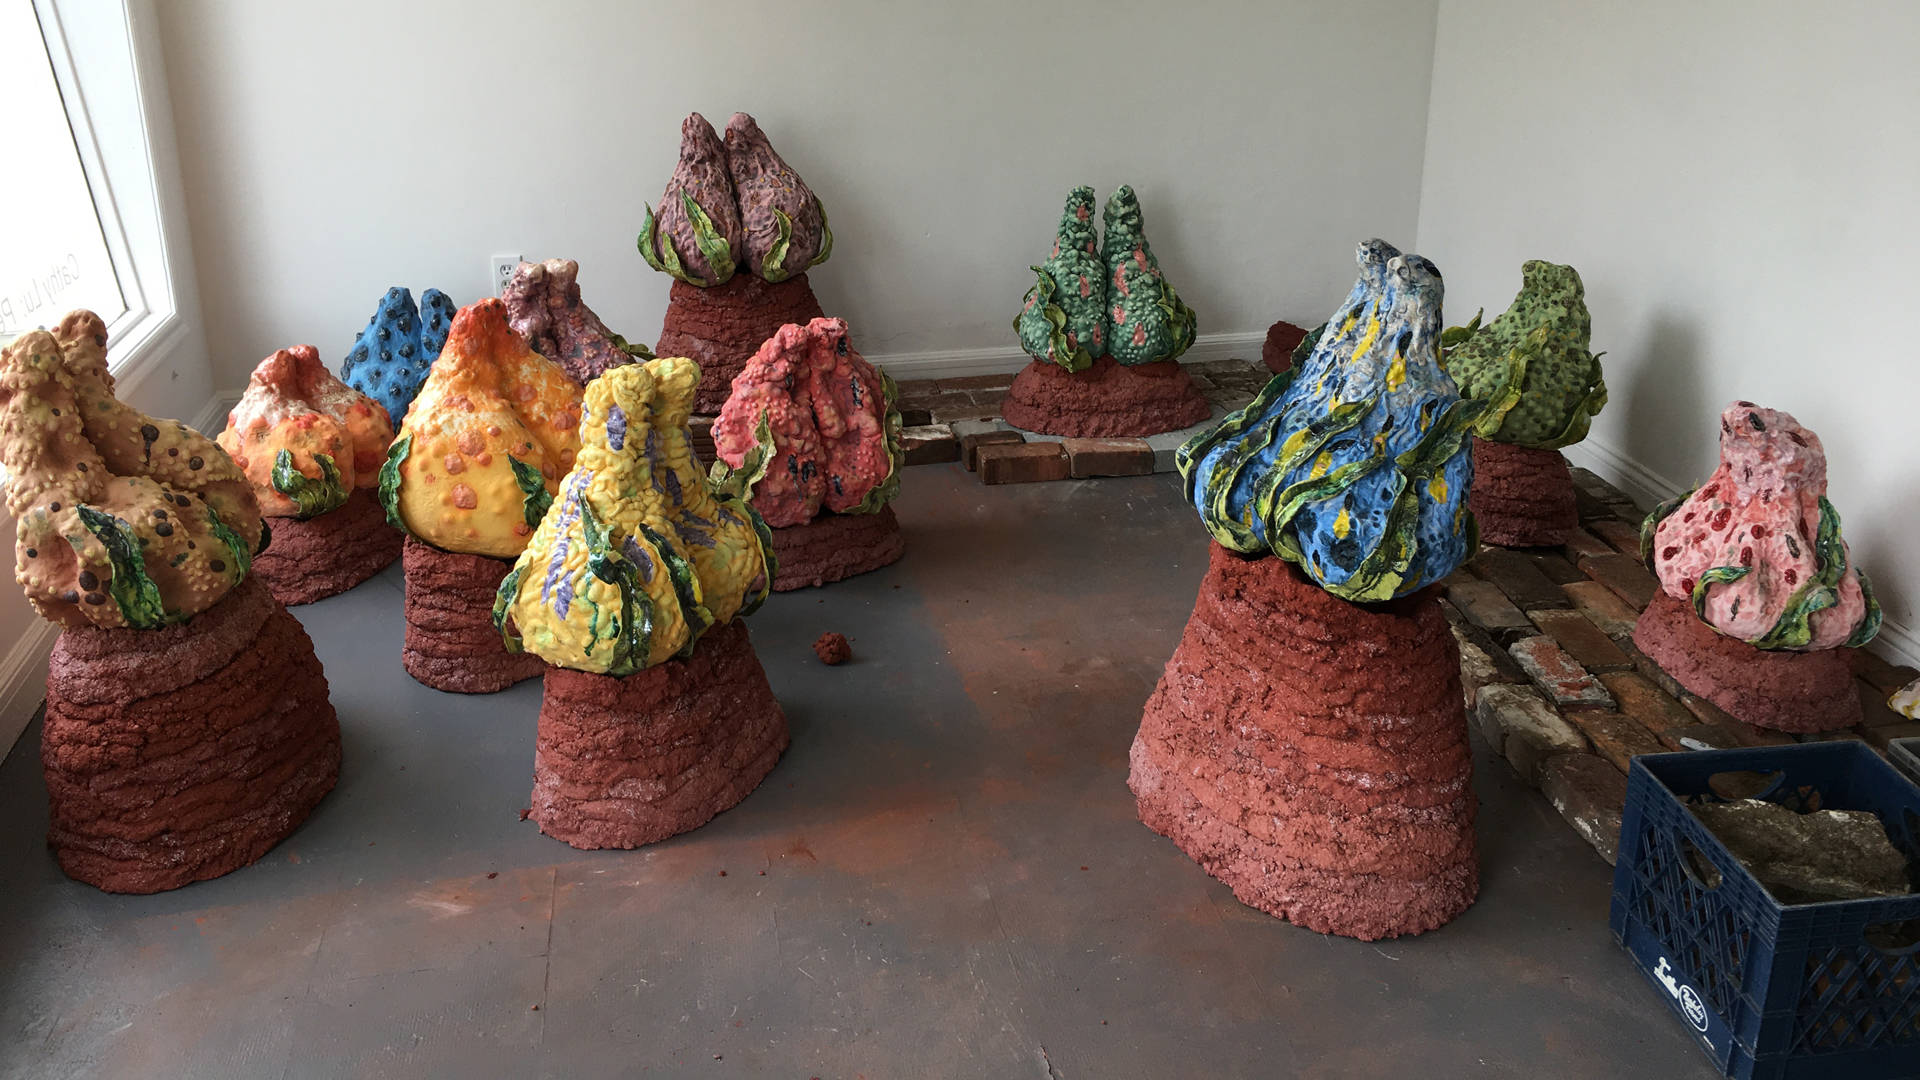 Cathy Lu's 'Peach Garden' mid-installation at Irving Street Projects. Courtesy of Irving Street Projects